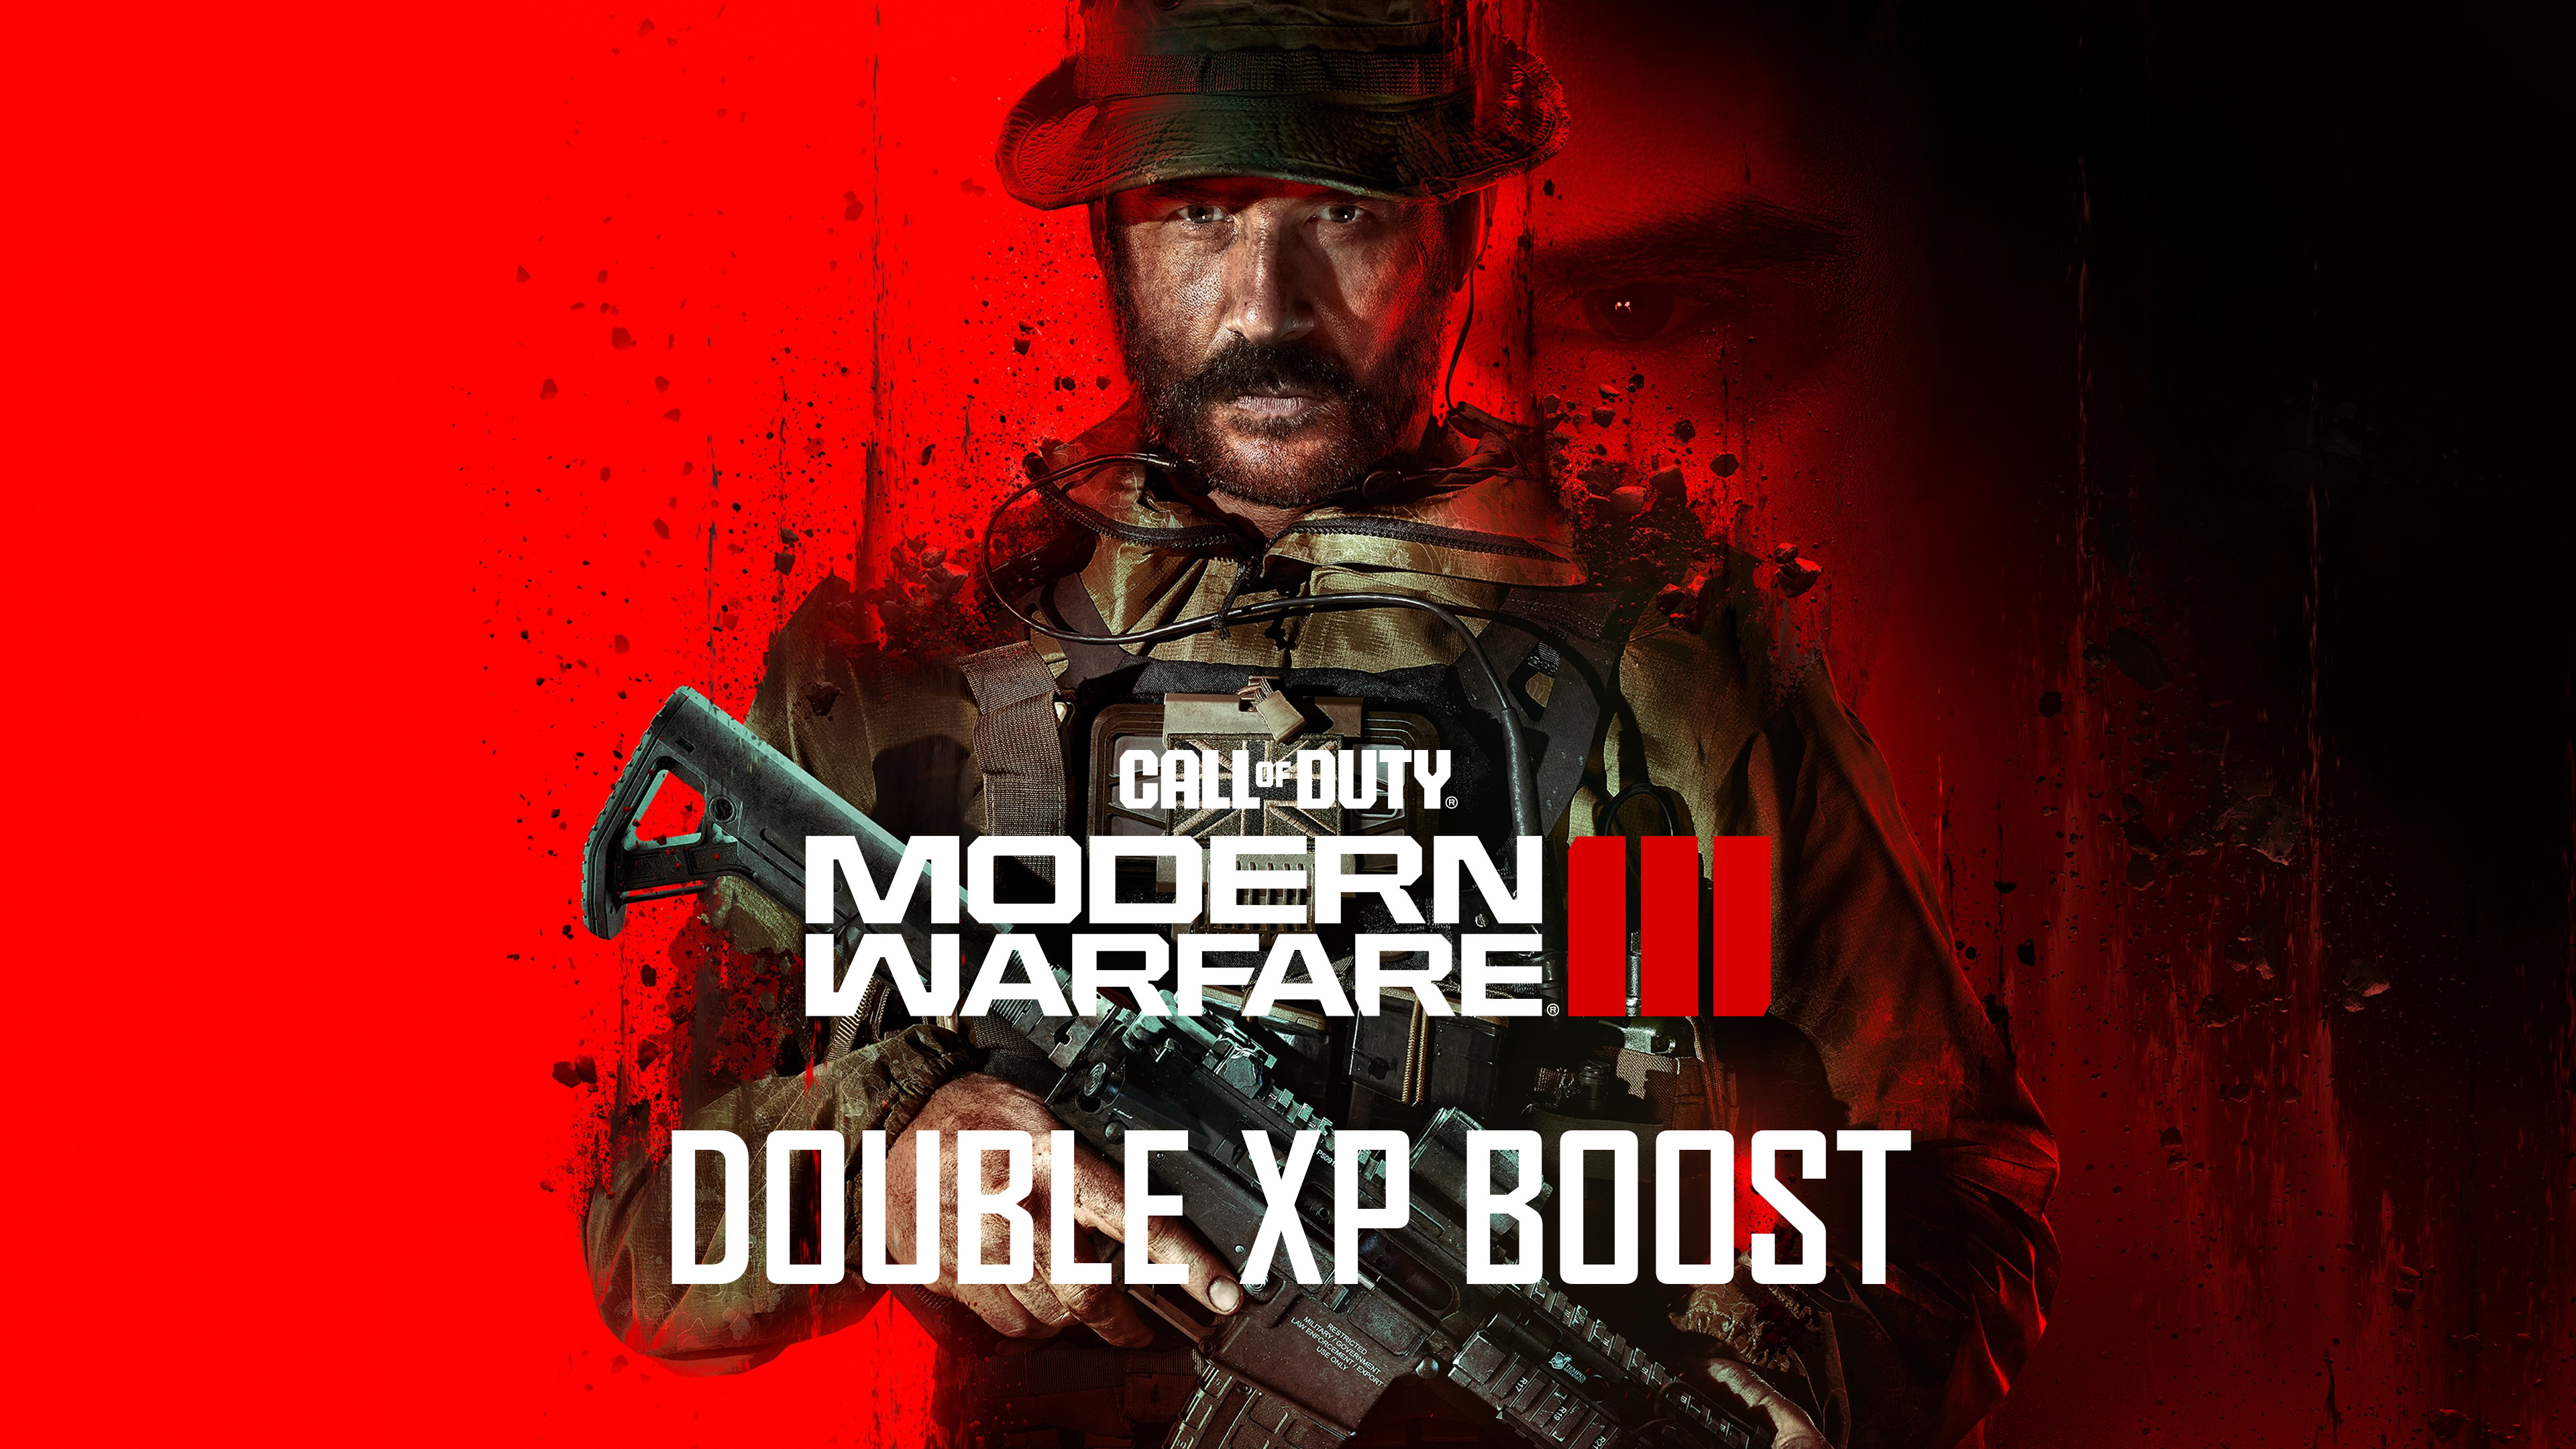 Call Of Duty: Modern Warfare III / Warzone 2 - 2 Hours Double XP Boost + 2 Hours Weapon 2XP PC/PS4/PS5/XBOX One/Series X,S CD Key